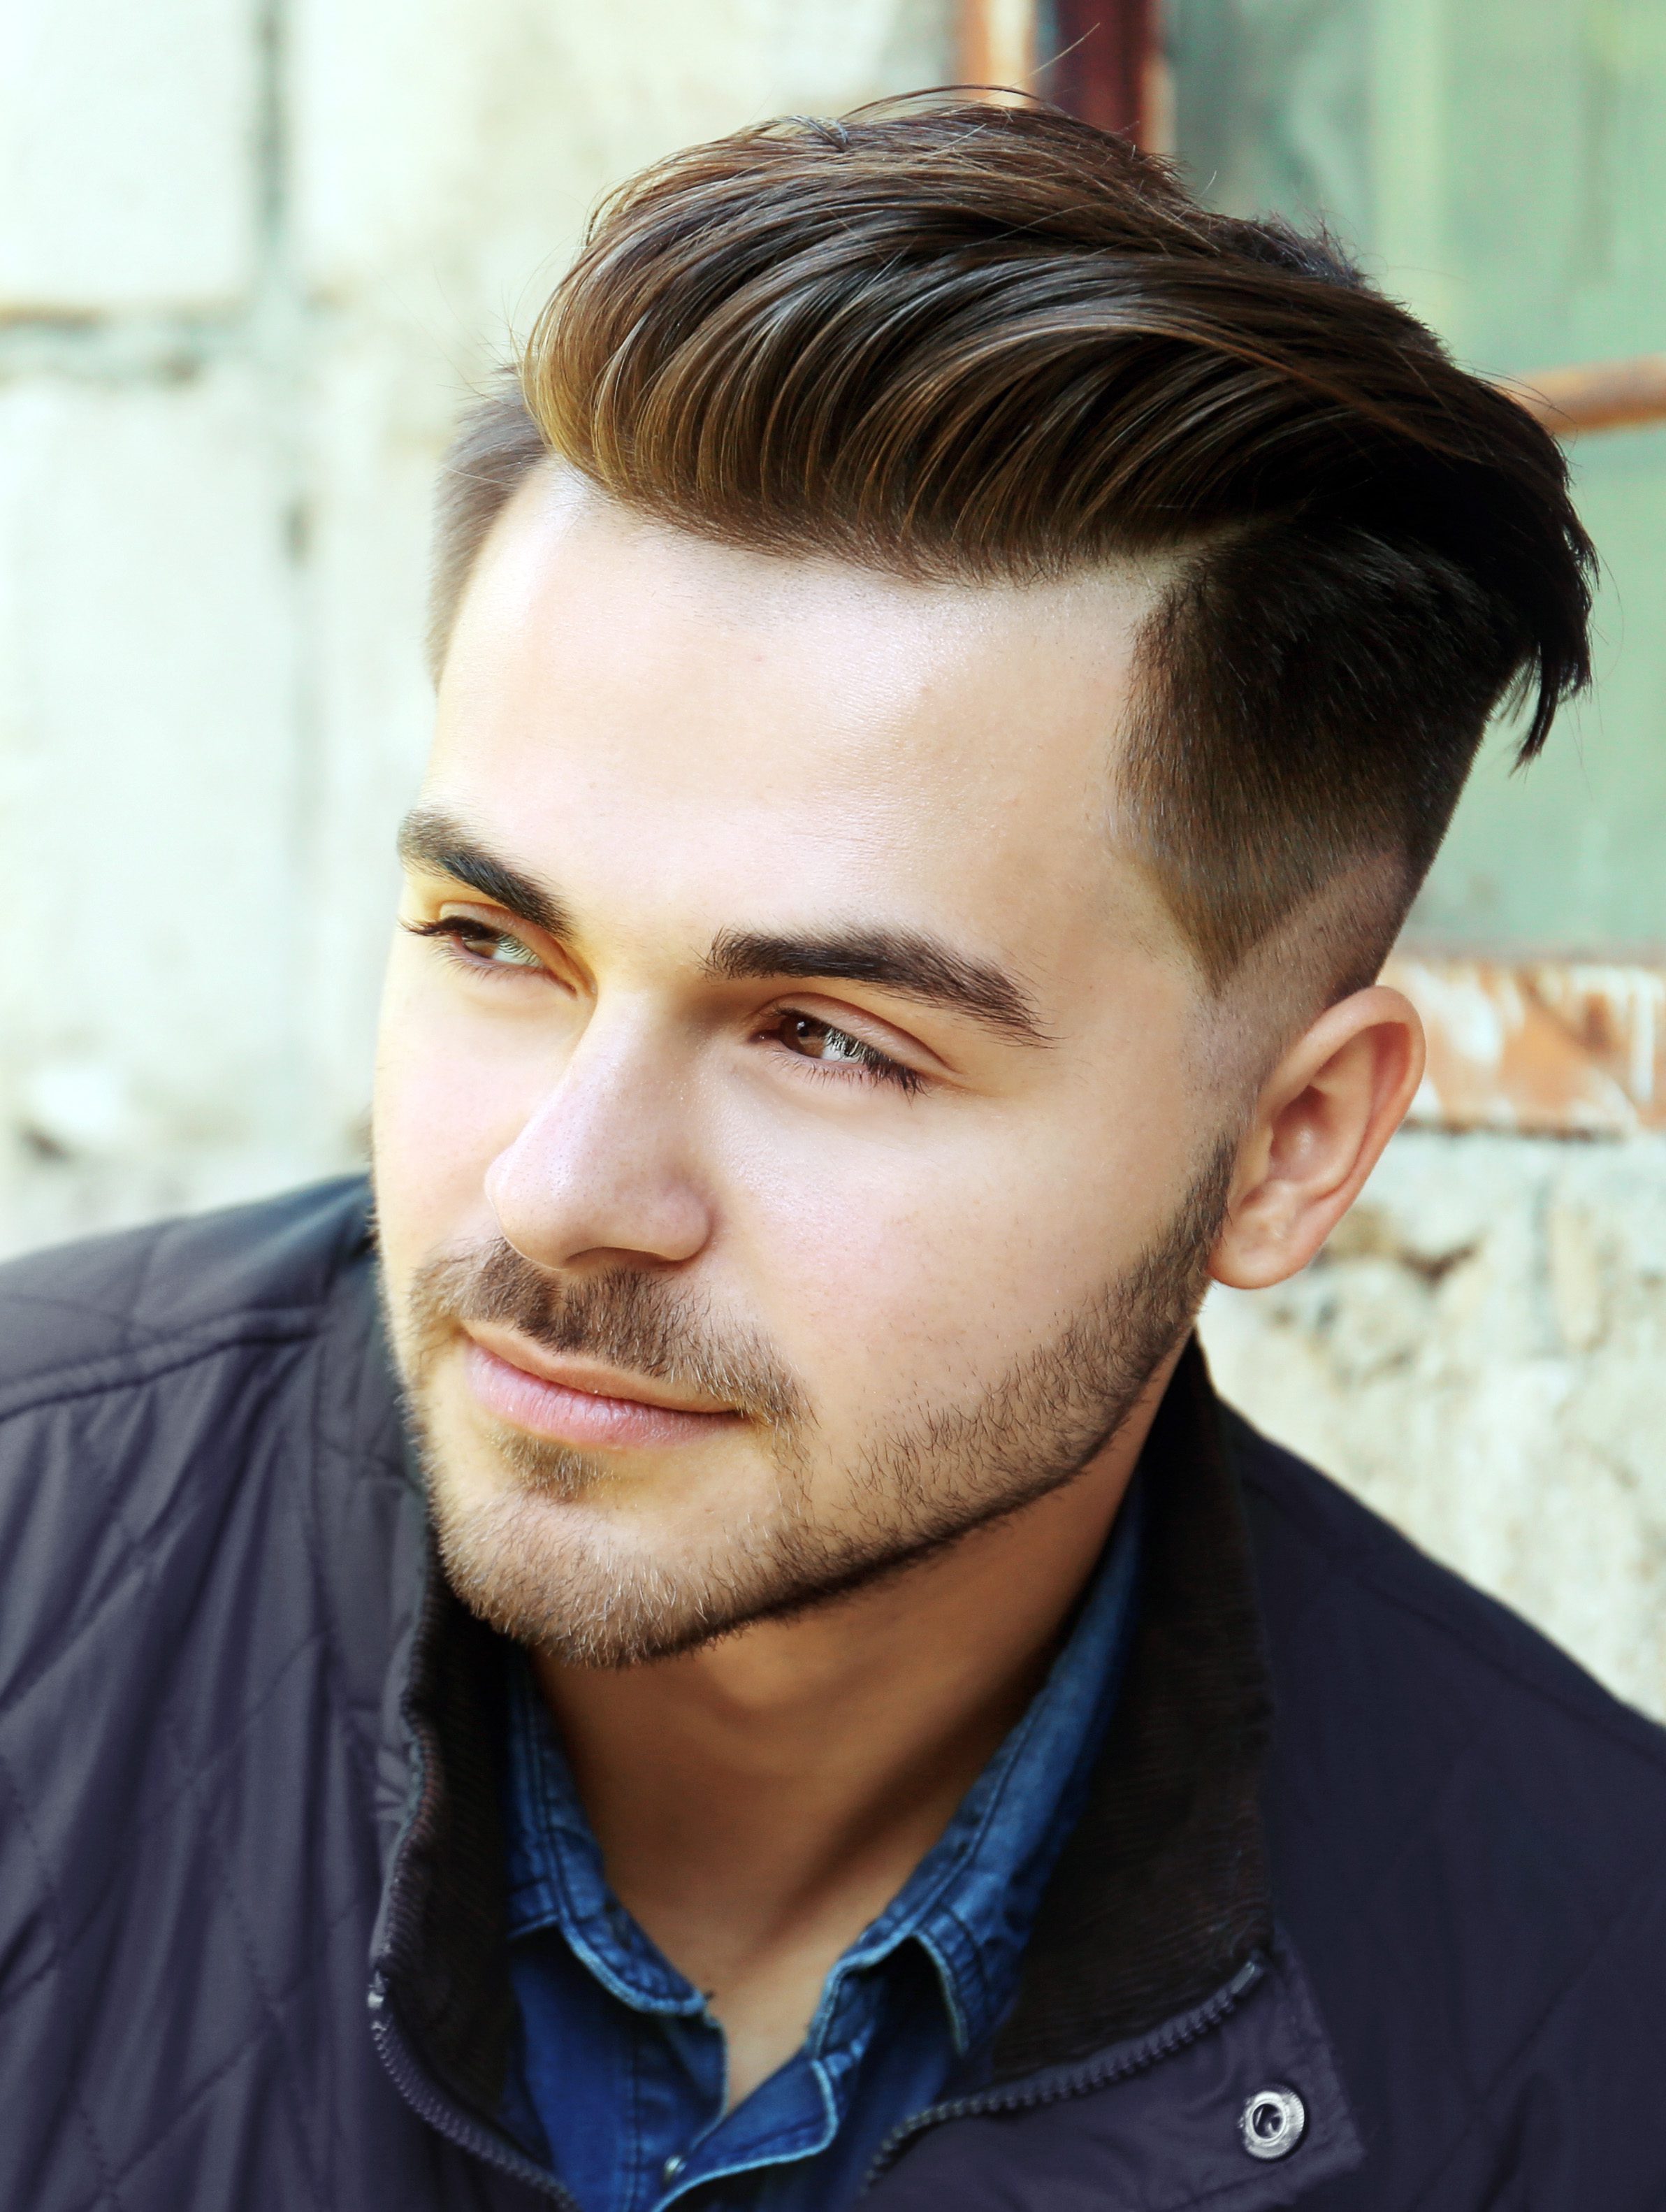 10+ Classy Men's Slicked Back Styles with Side Part | Haircut Inspiration